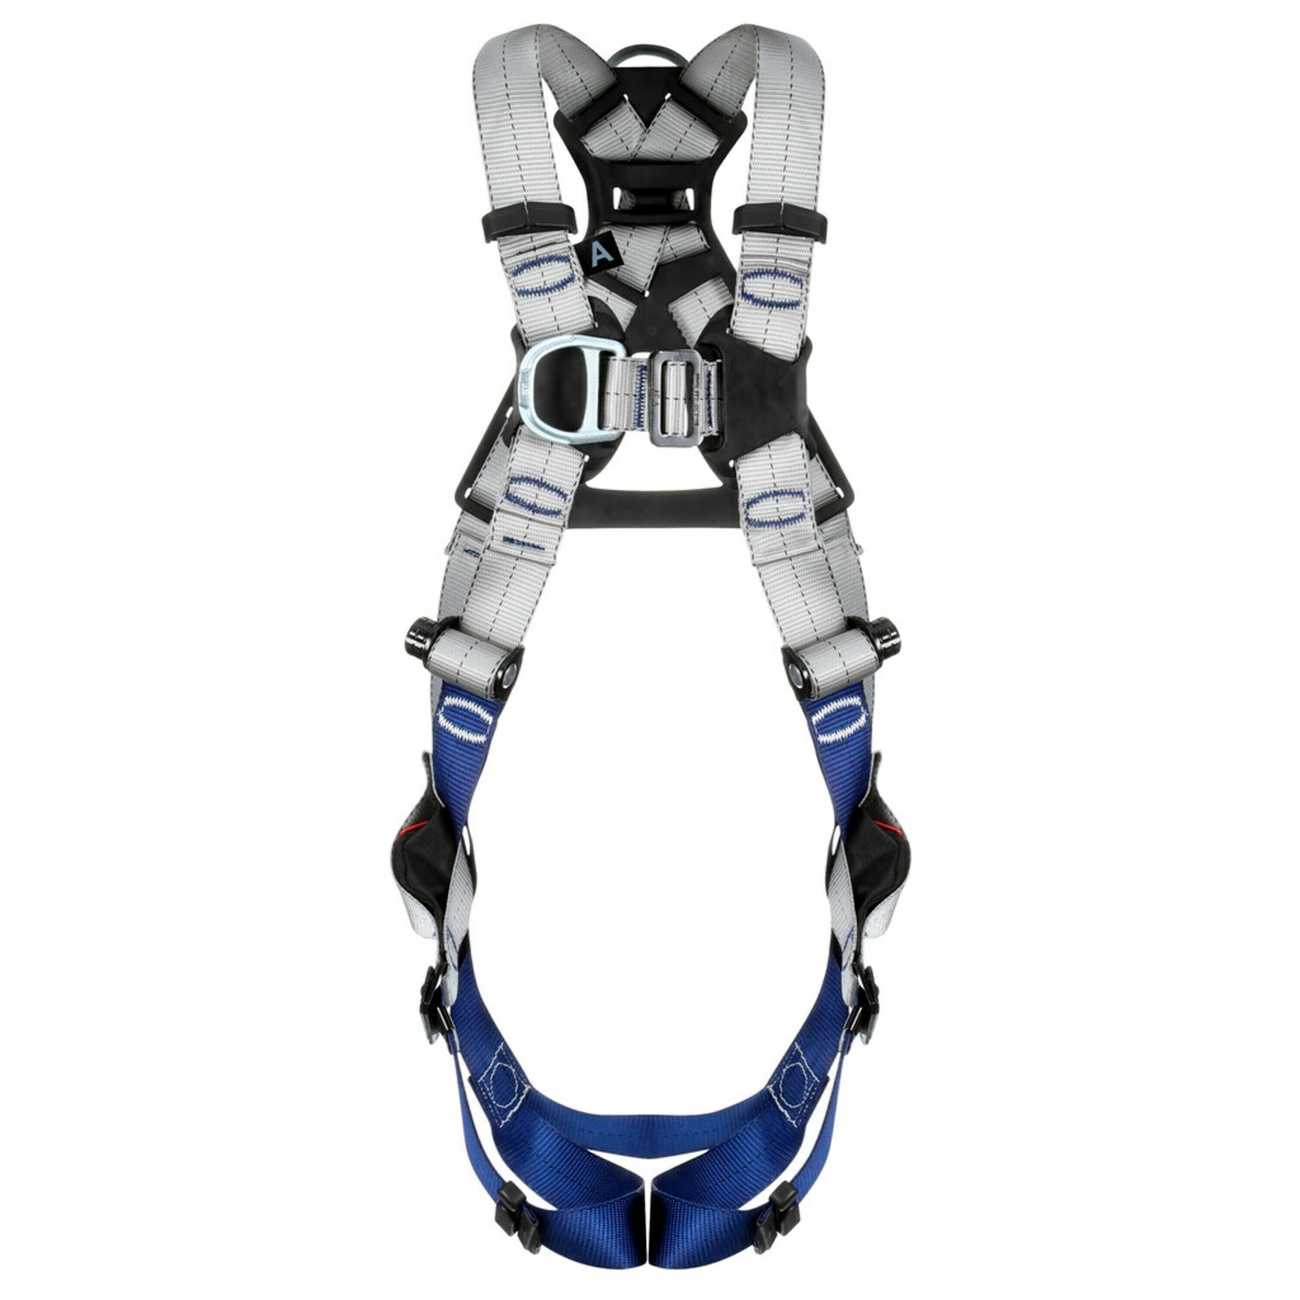 3M DBI-SALA ExoFit XE50 2-point harness with rescue loops 1112718, automatic buckles, size 2